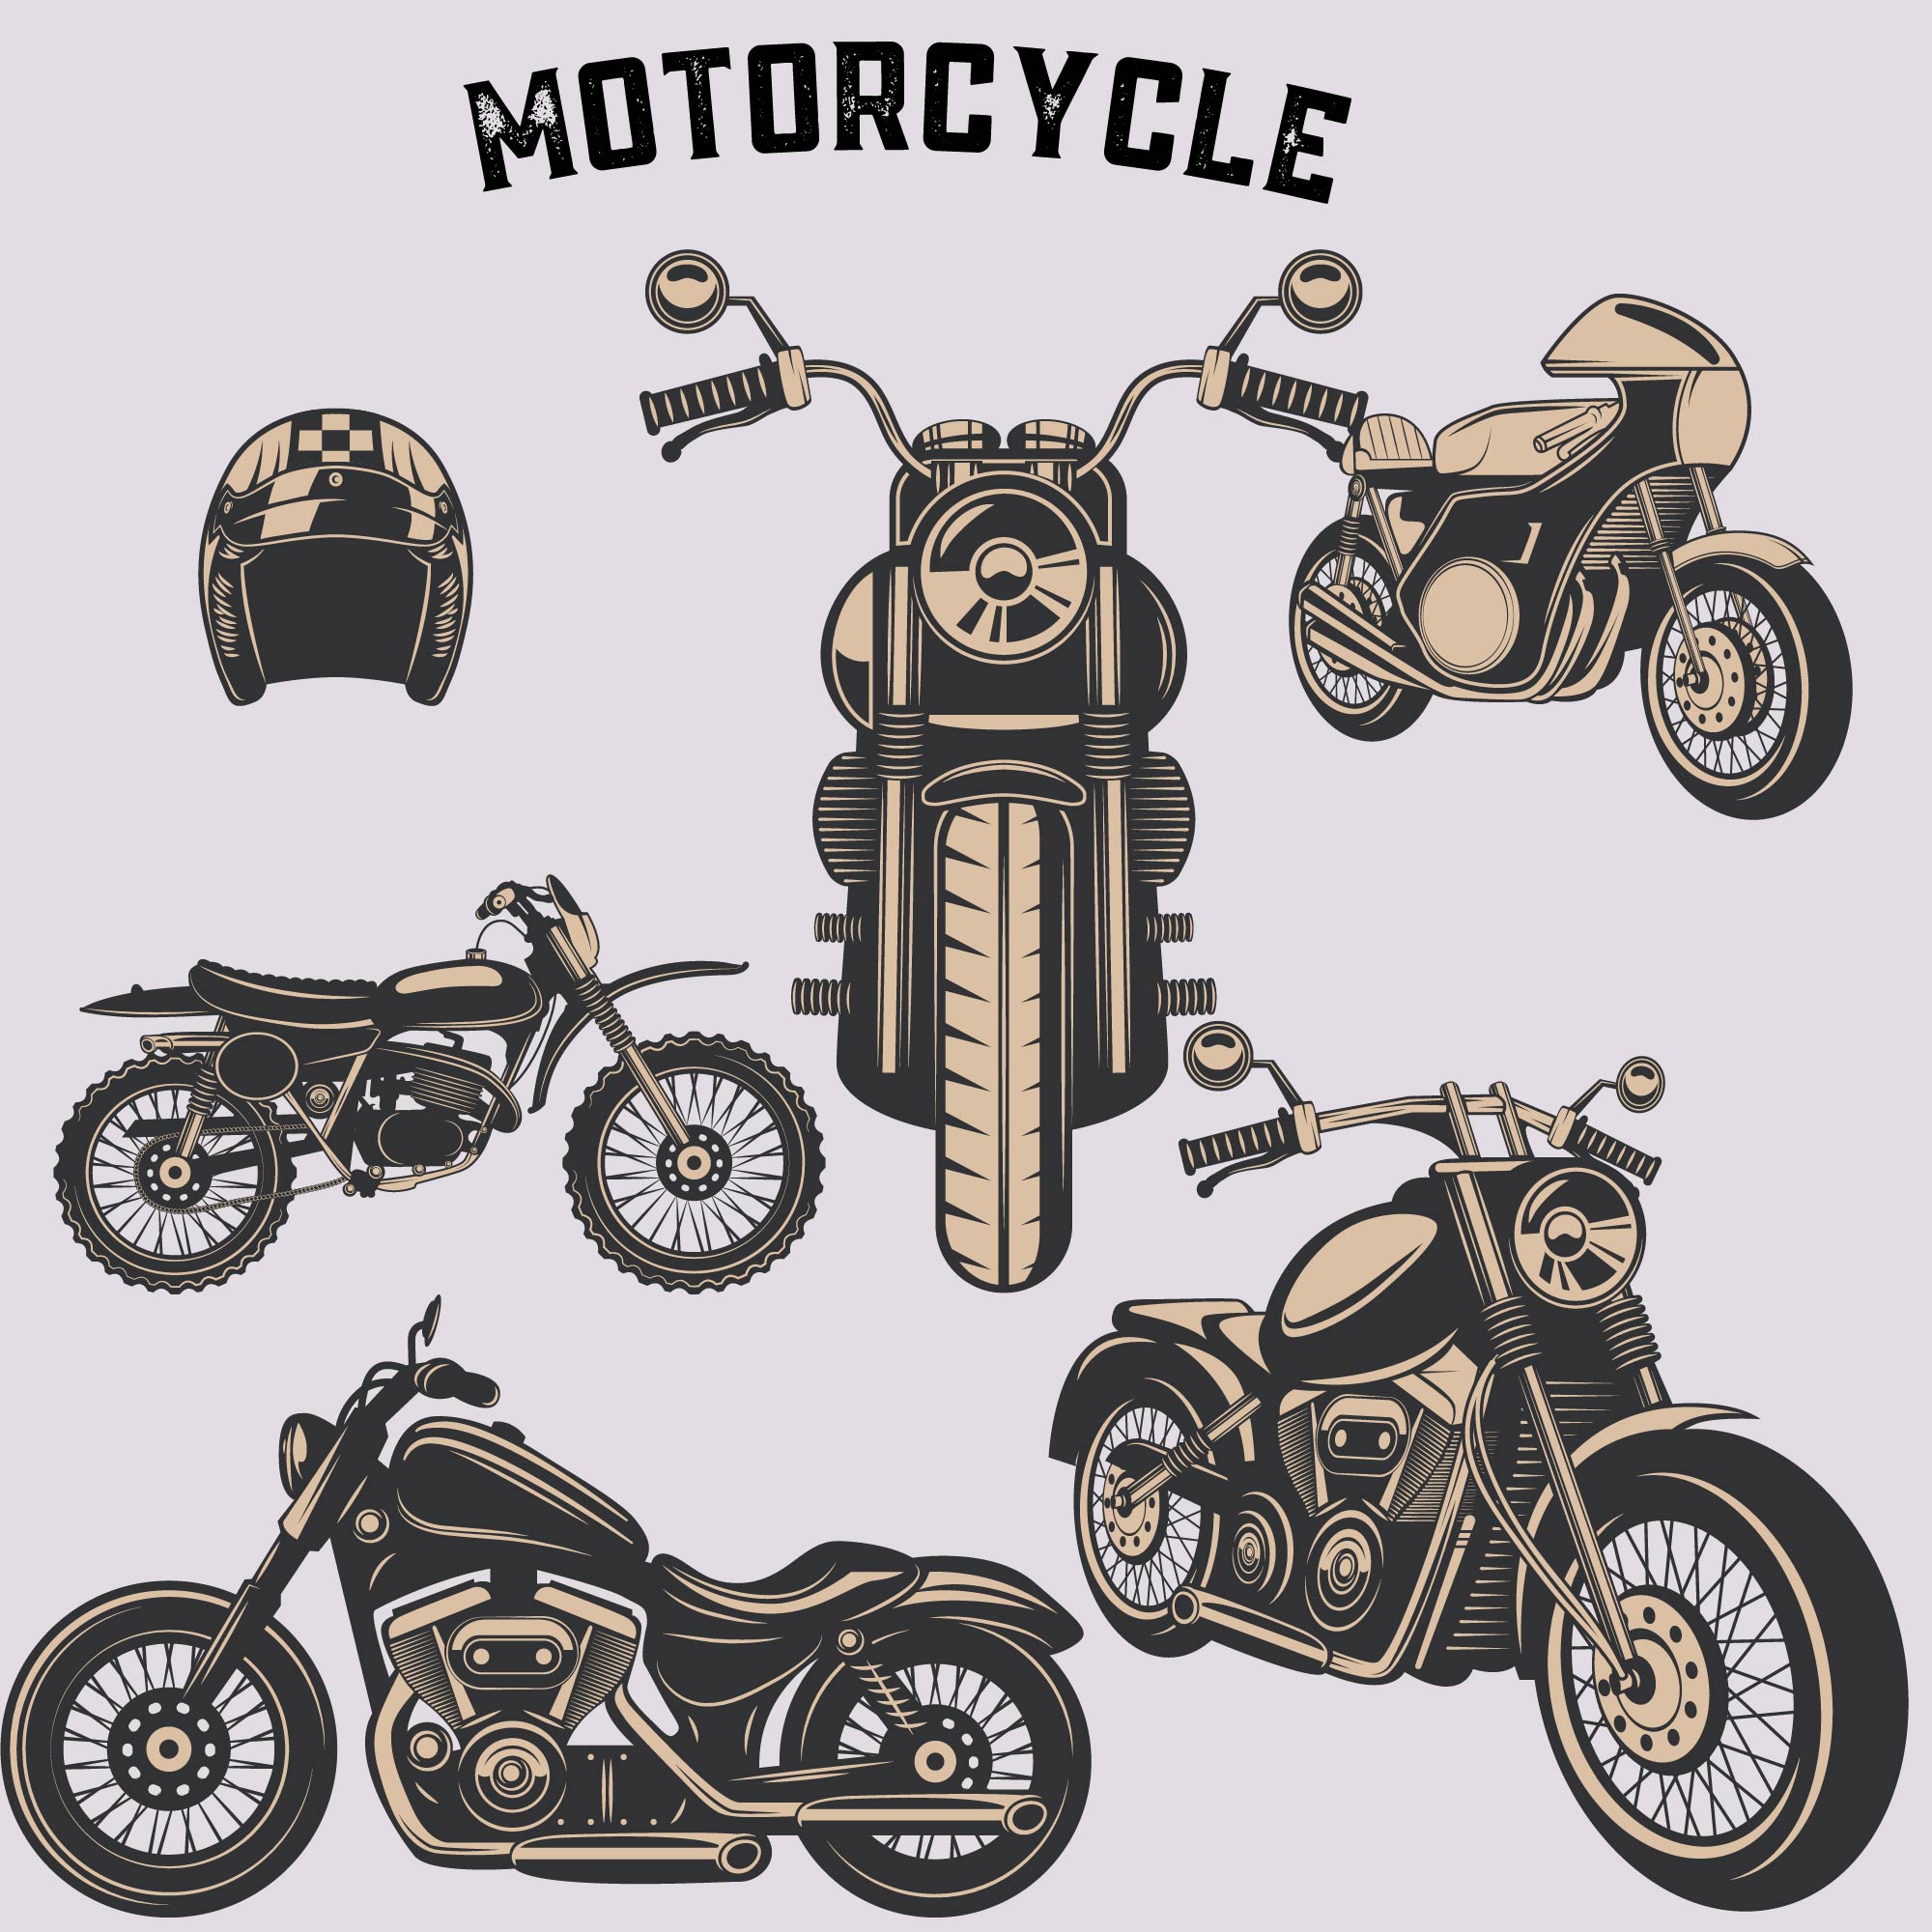 Retro Motorcycle Design Elements cover image.